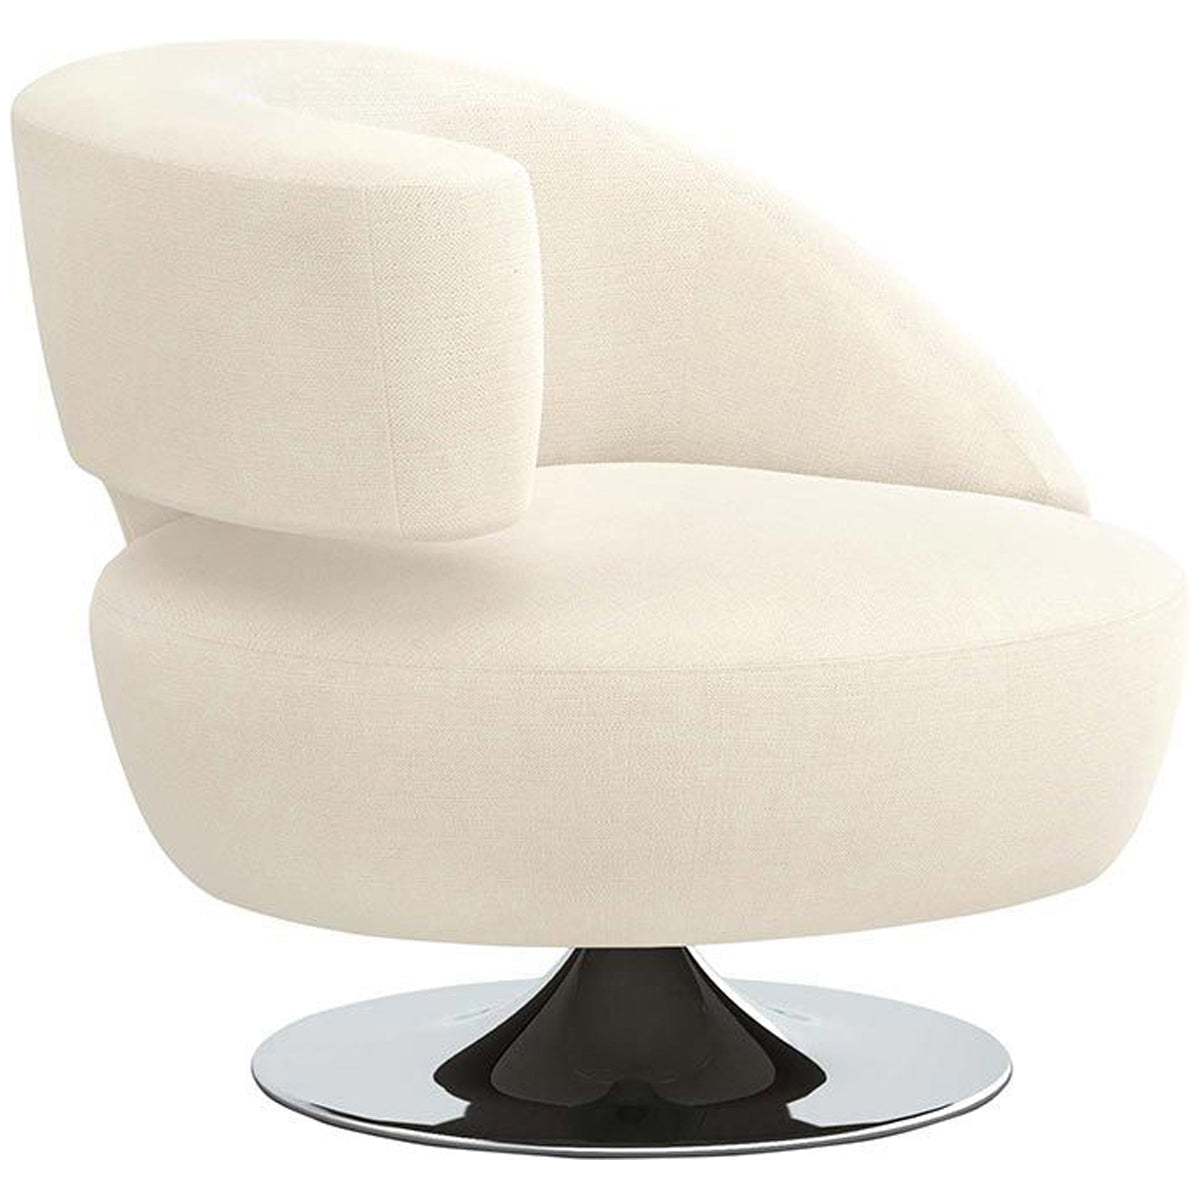 Interlude Home Isabella Swivel Chair